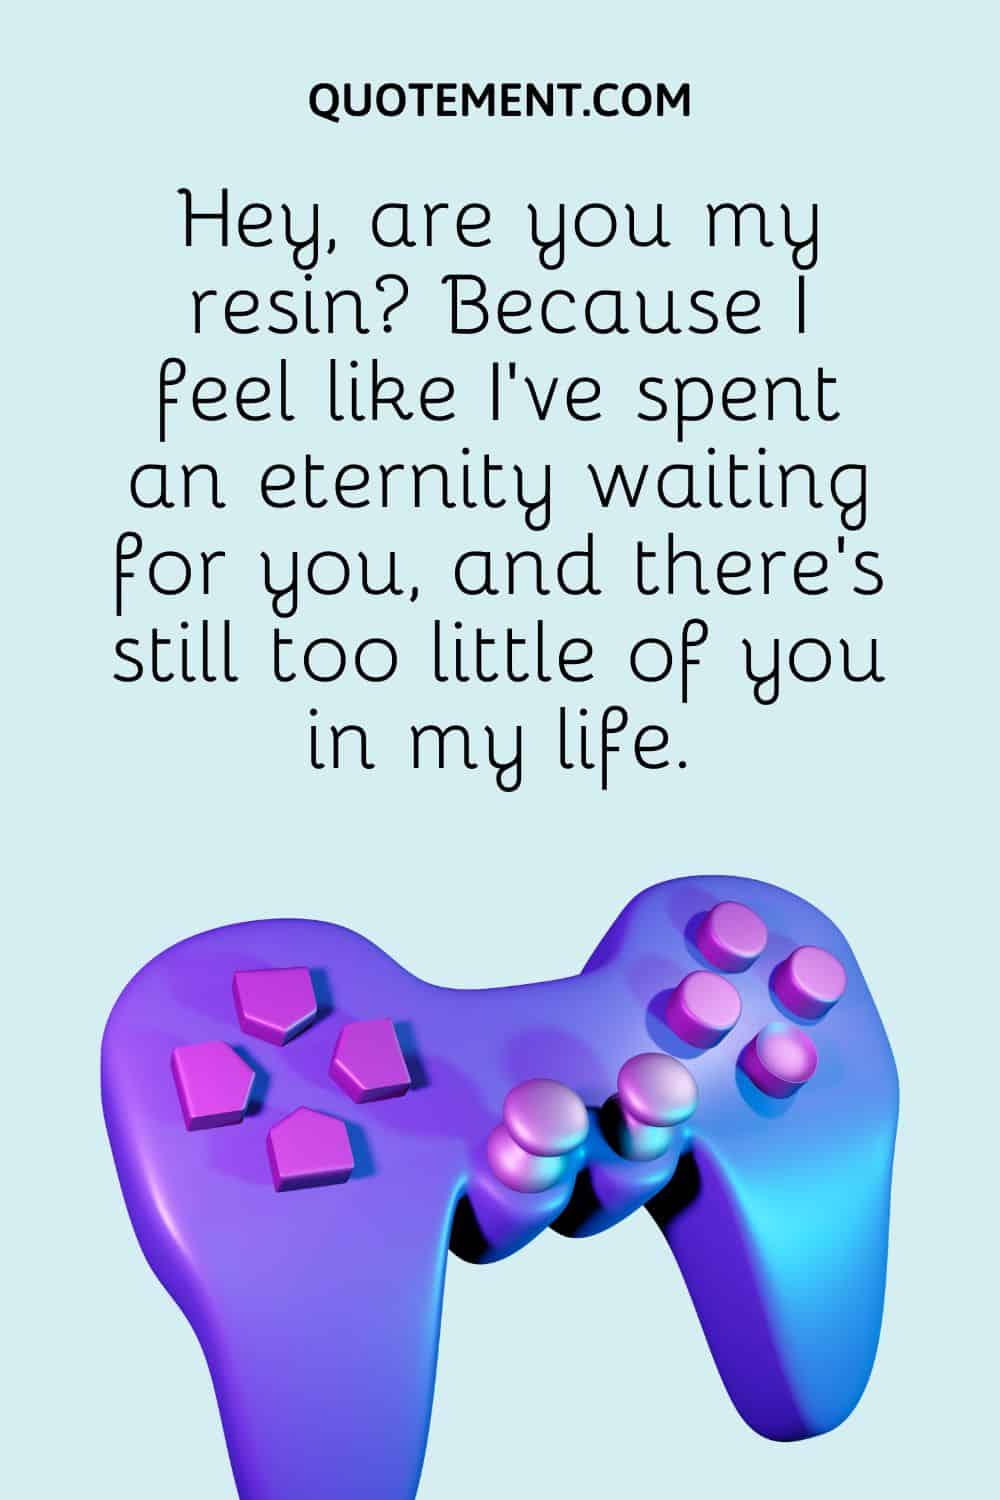 Hey, are you my resin Because I feel like I've spent an eternity waiting for you, and there's still too little of you in my life.